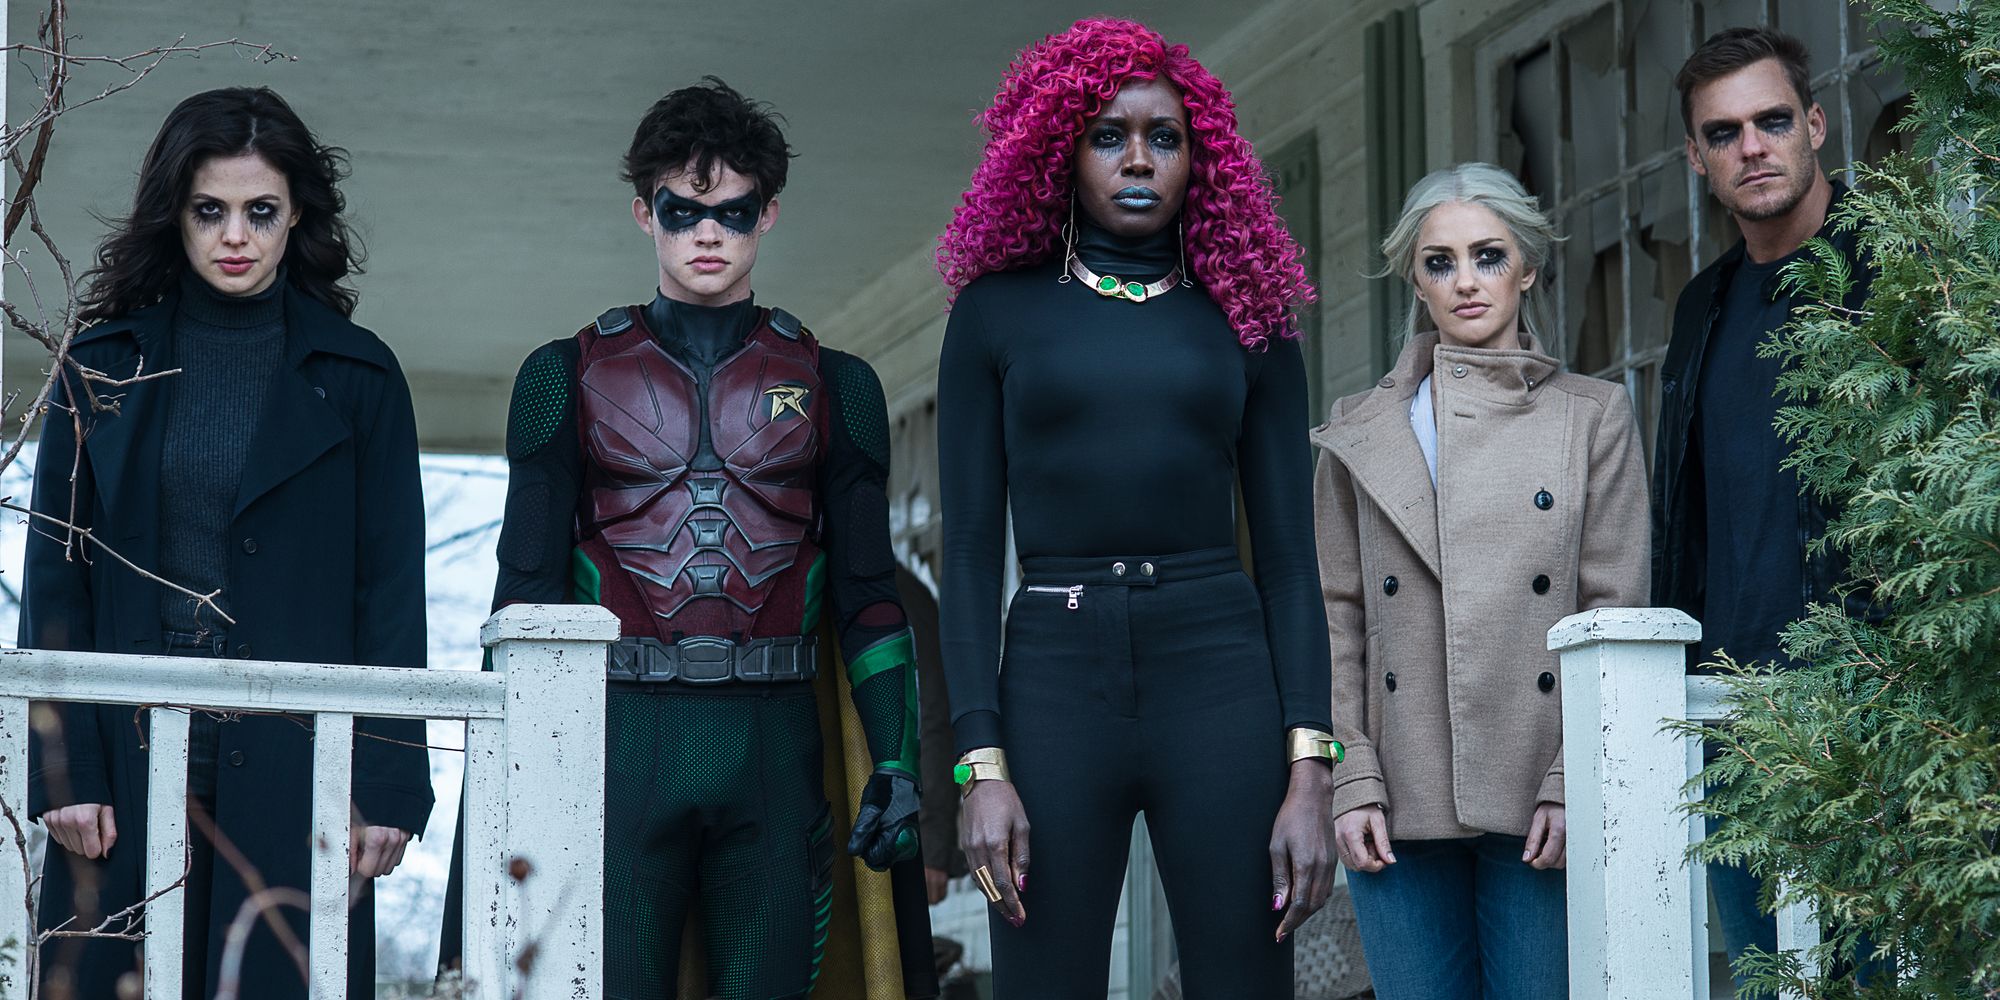 Fall 2019 TV Premiere Dates: All The New & Returning Shows To Watch